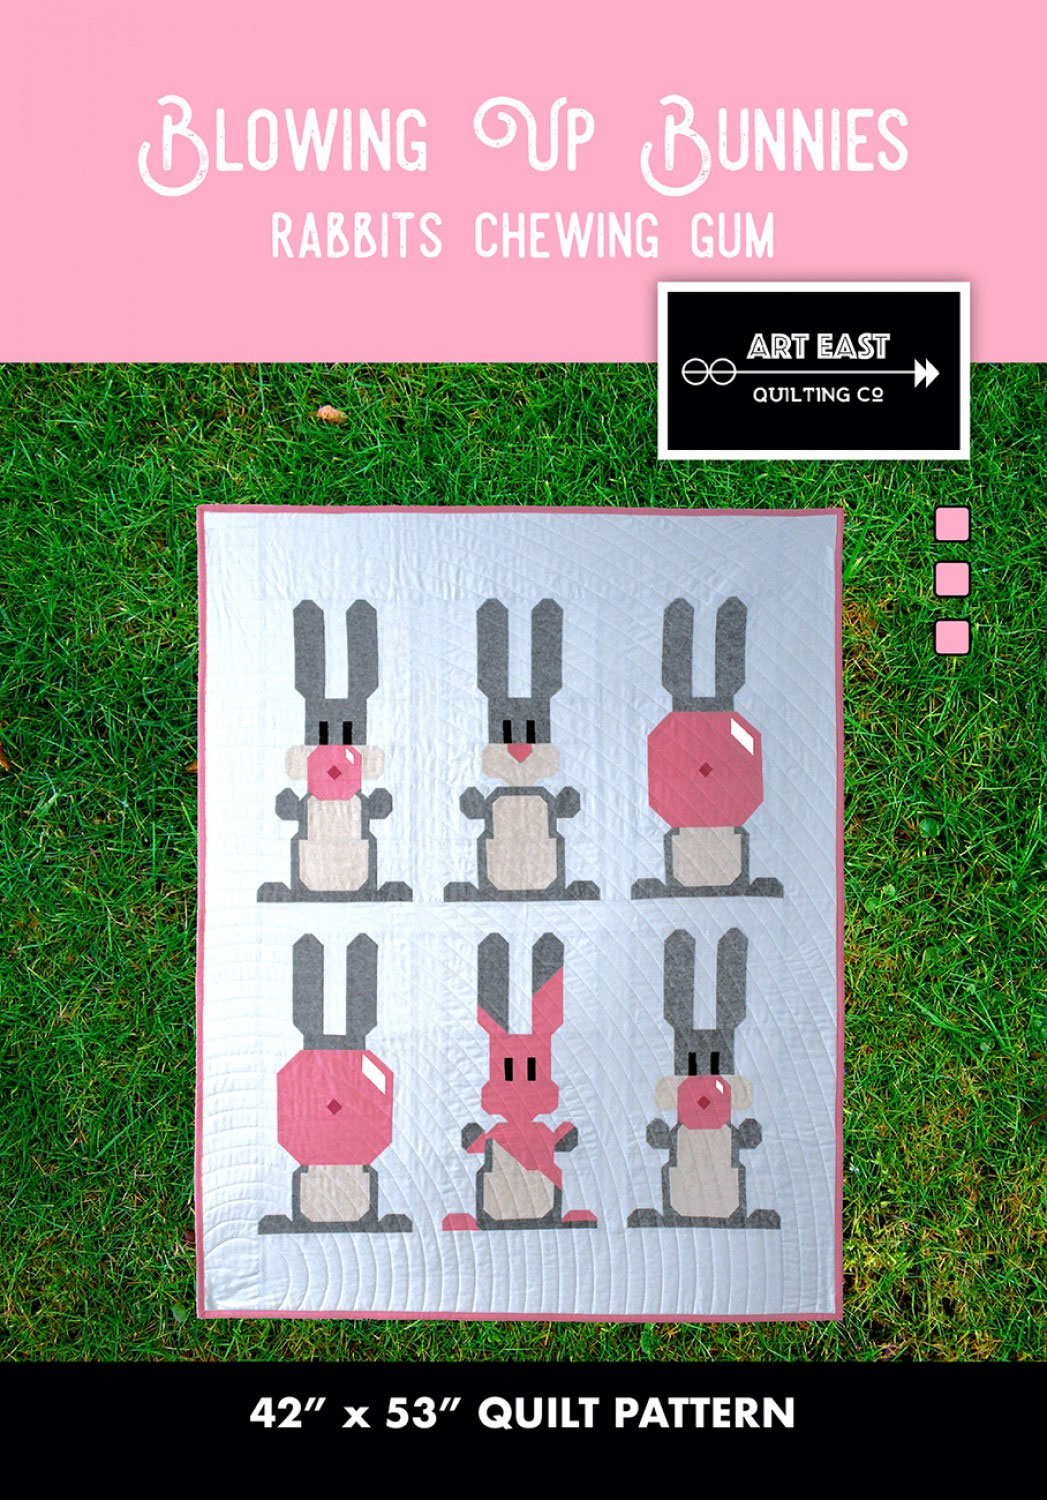 Blowing-Up-Bunnies-quilt-sewing-pattern-Art-East-Quilting-Co-front